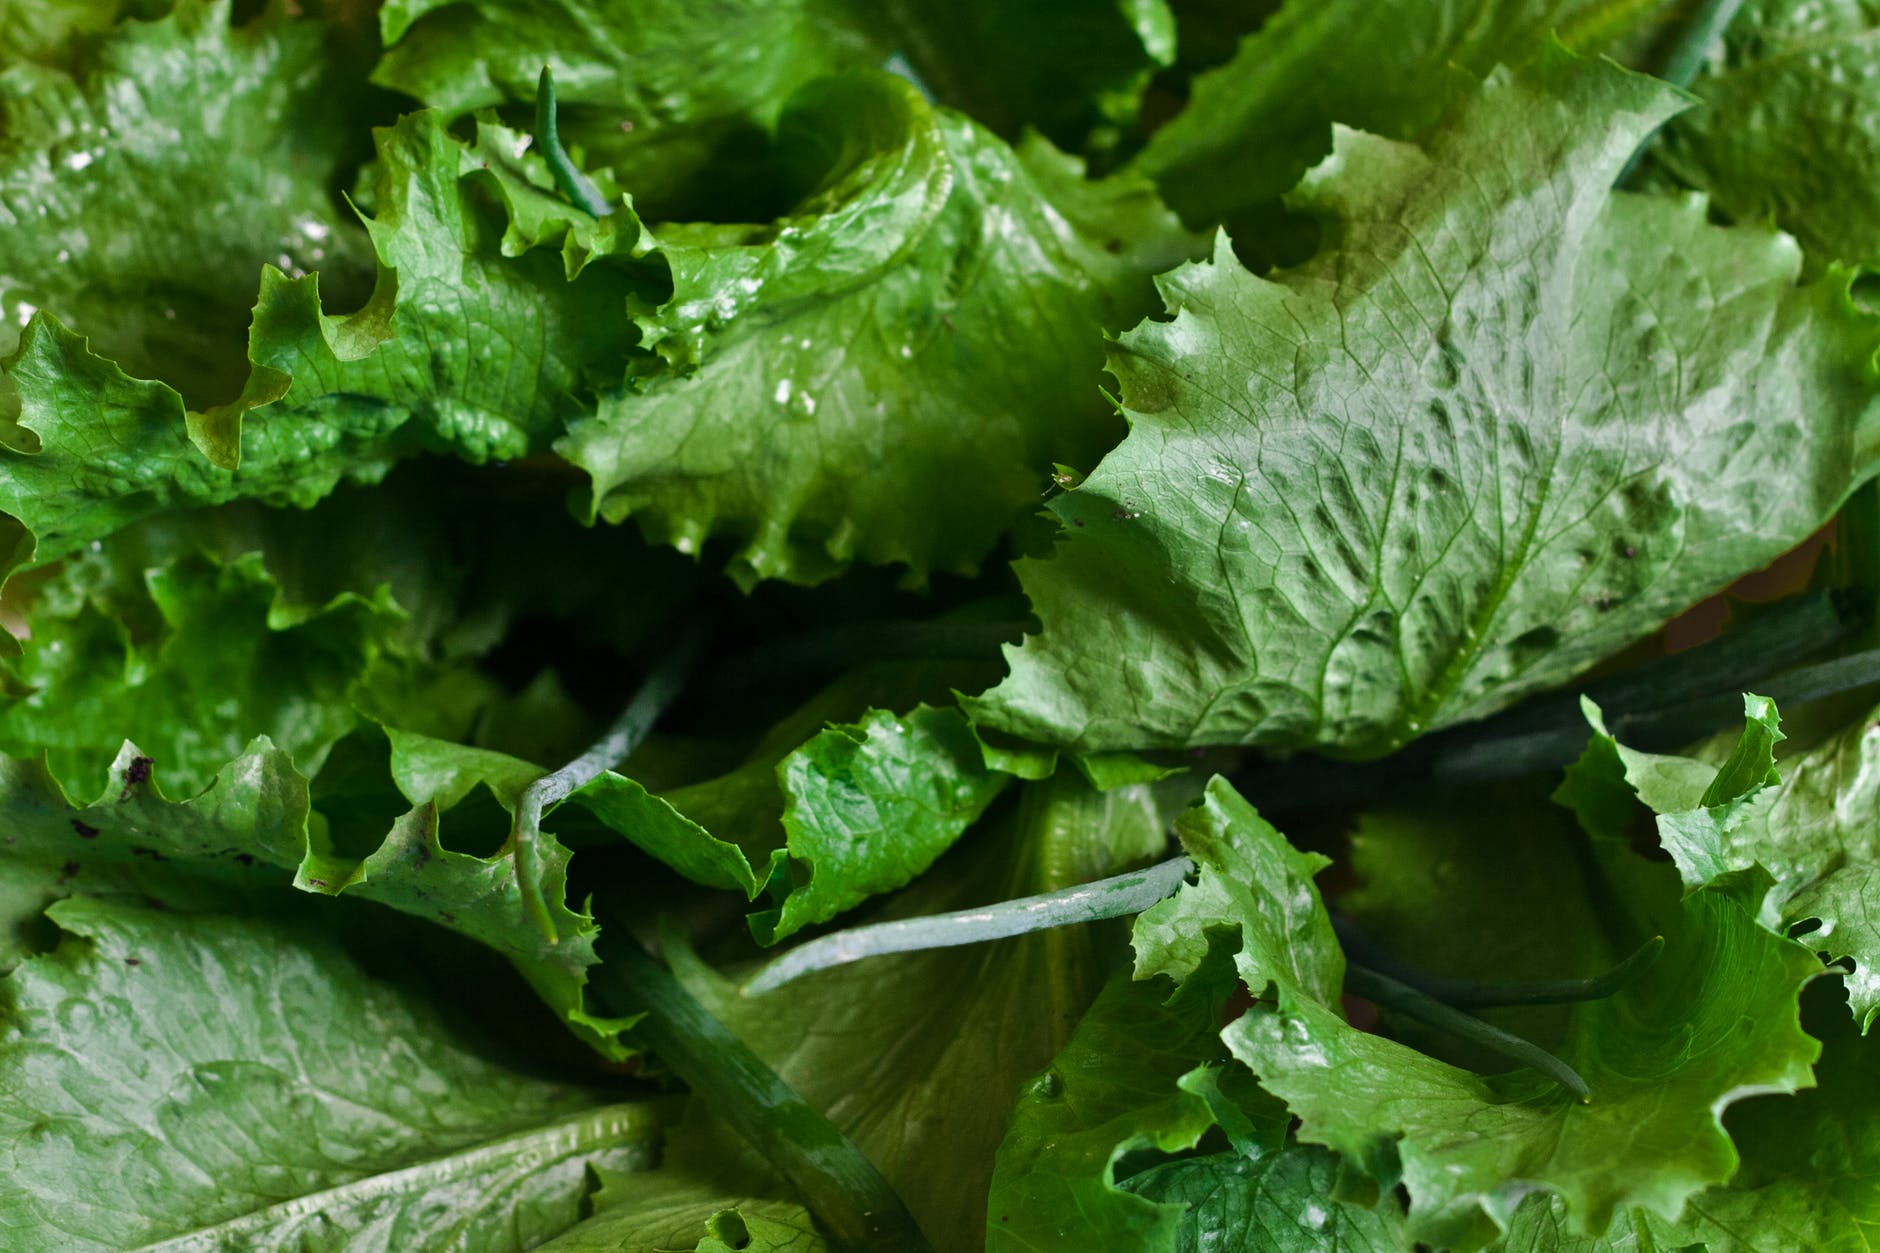 Healthy Foods To Control Diabetes - Leafy Greens